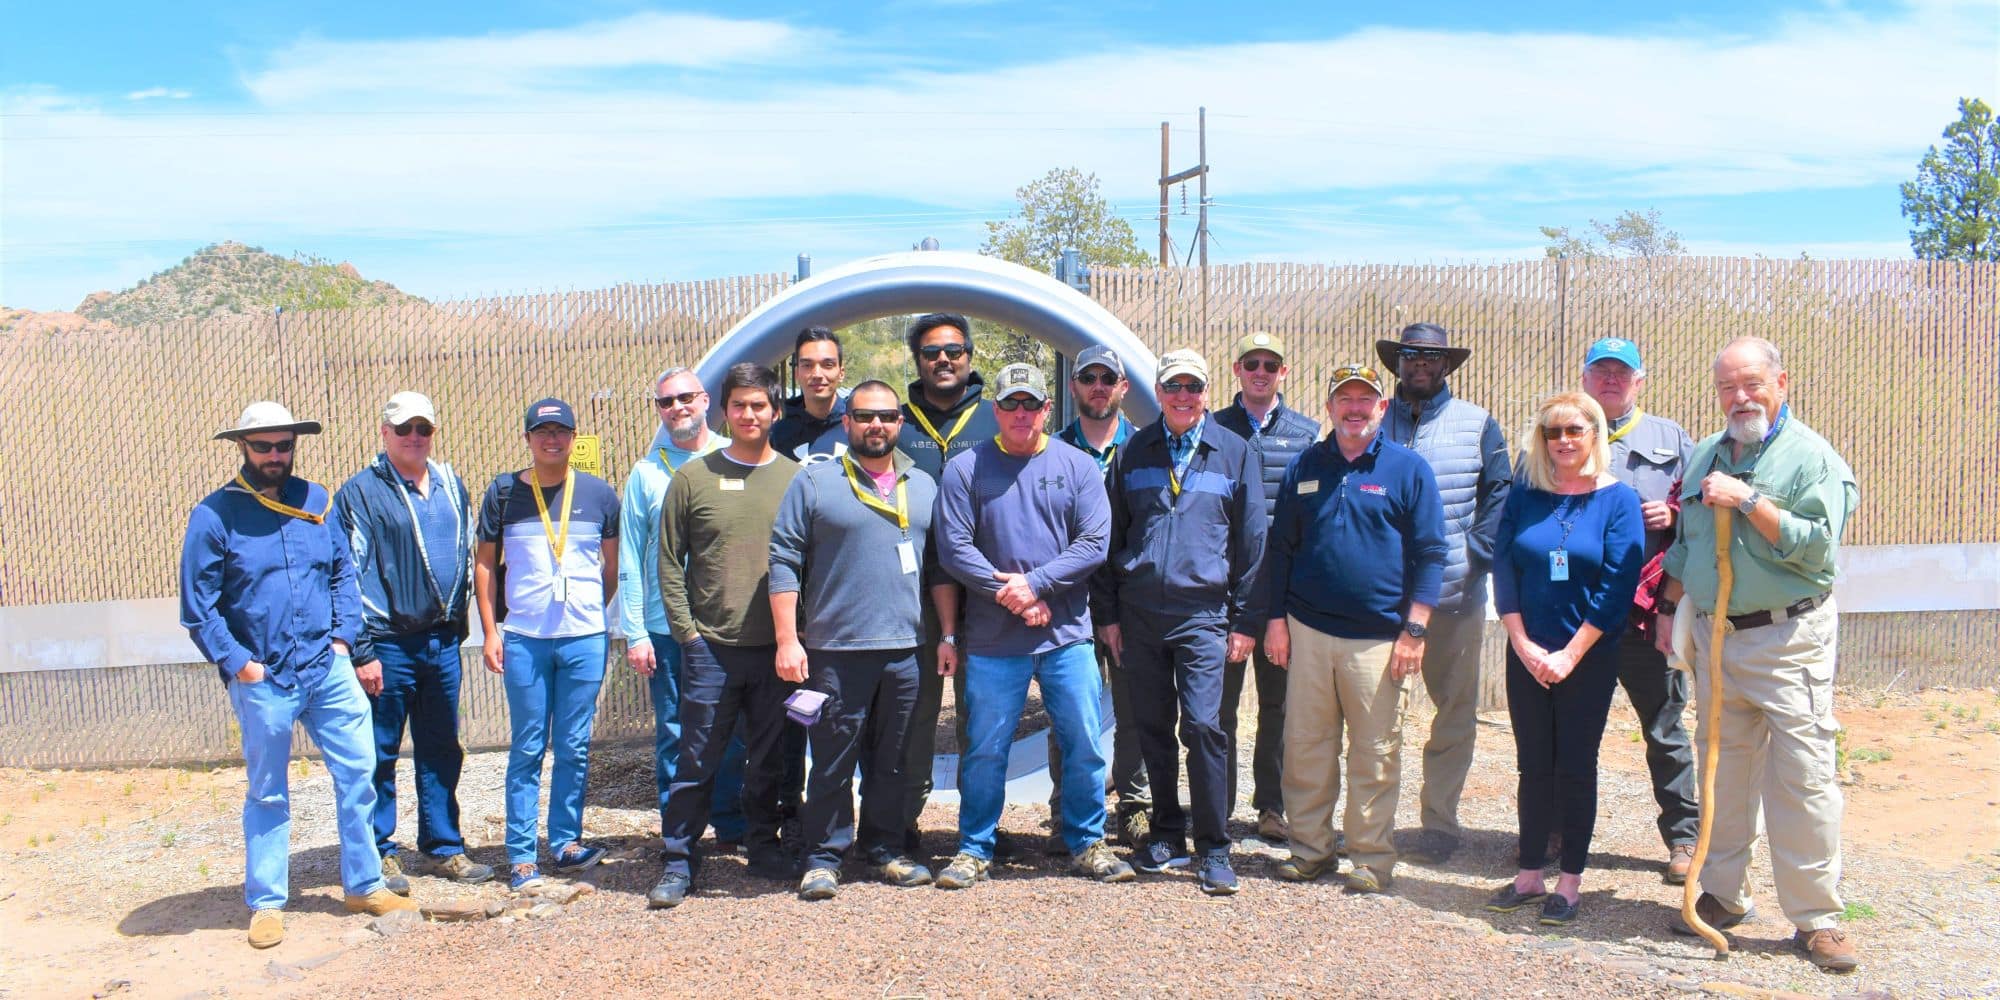 Ralph Alcock visited Embry-Riddle's Prescott Campus for a five-day accident investigation class at the Robertson Safety Institute (RSI). (Photo: Ralph Alcock)